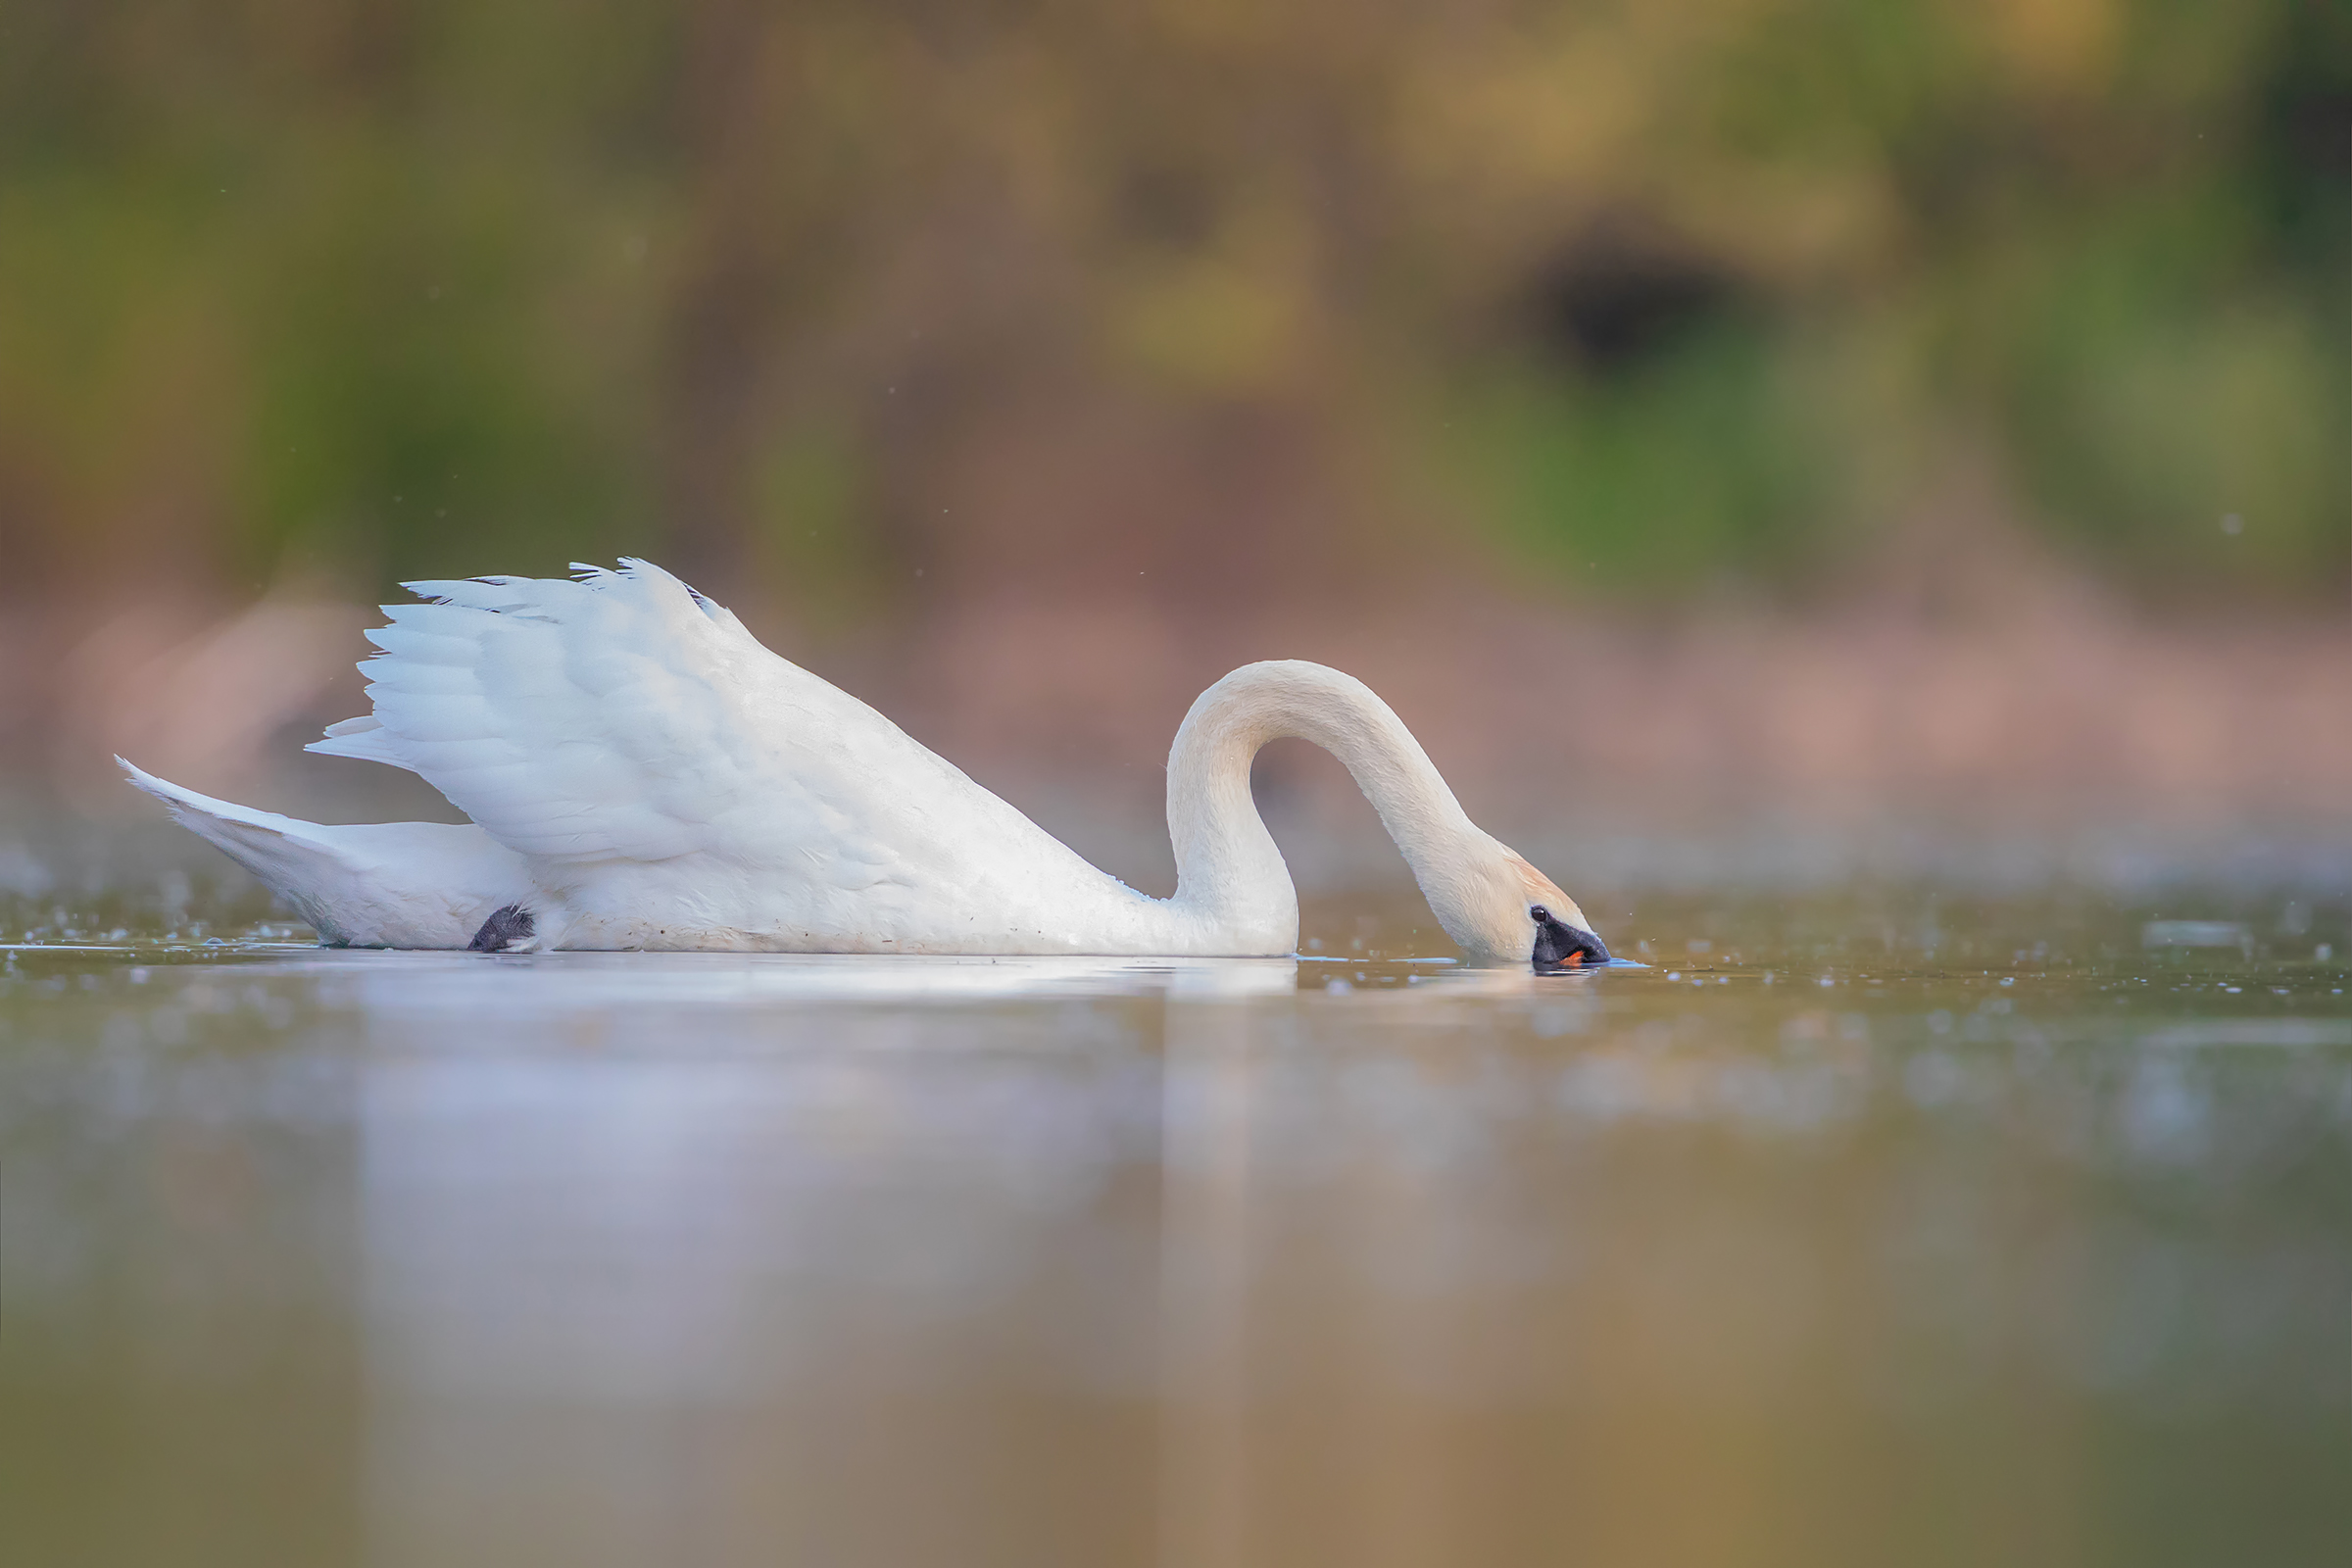 Royal Swan first photo with floating hide...